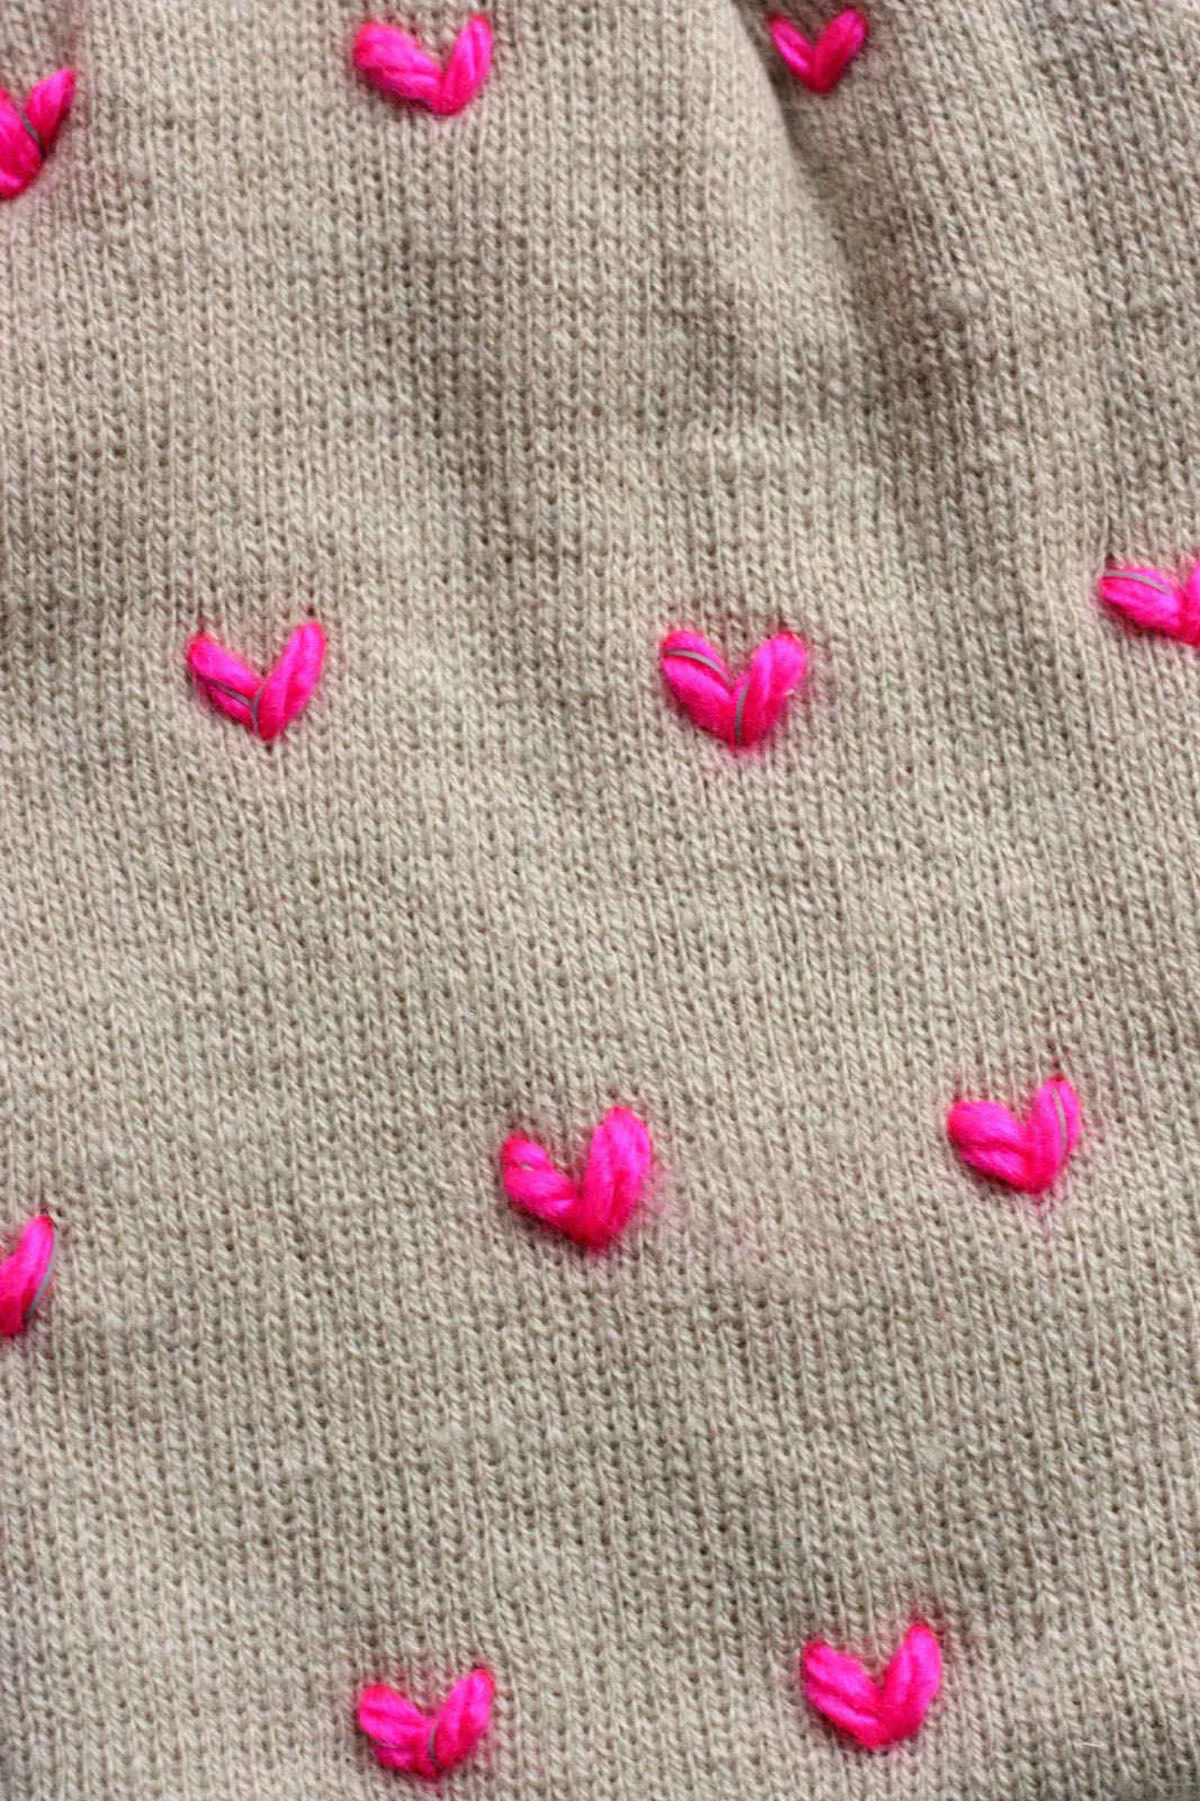 Heart pattern stitched into a beanie with yarn